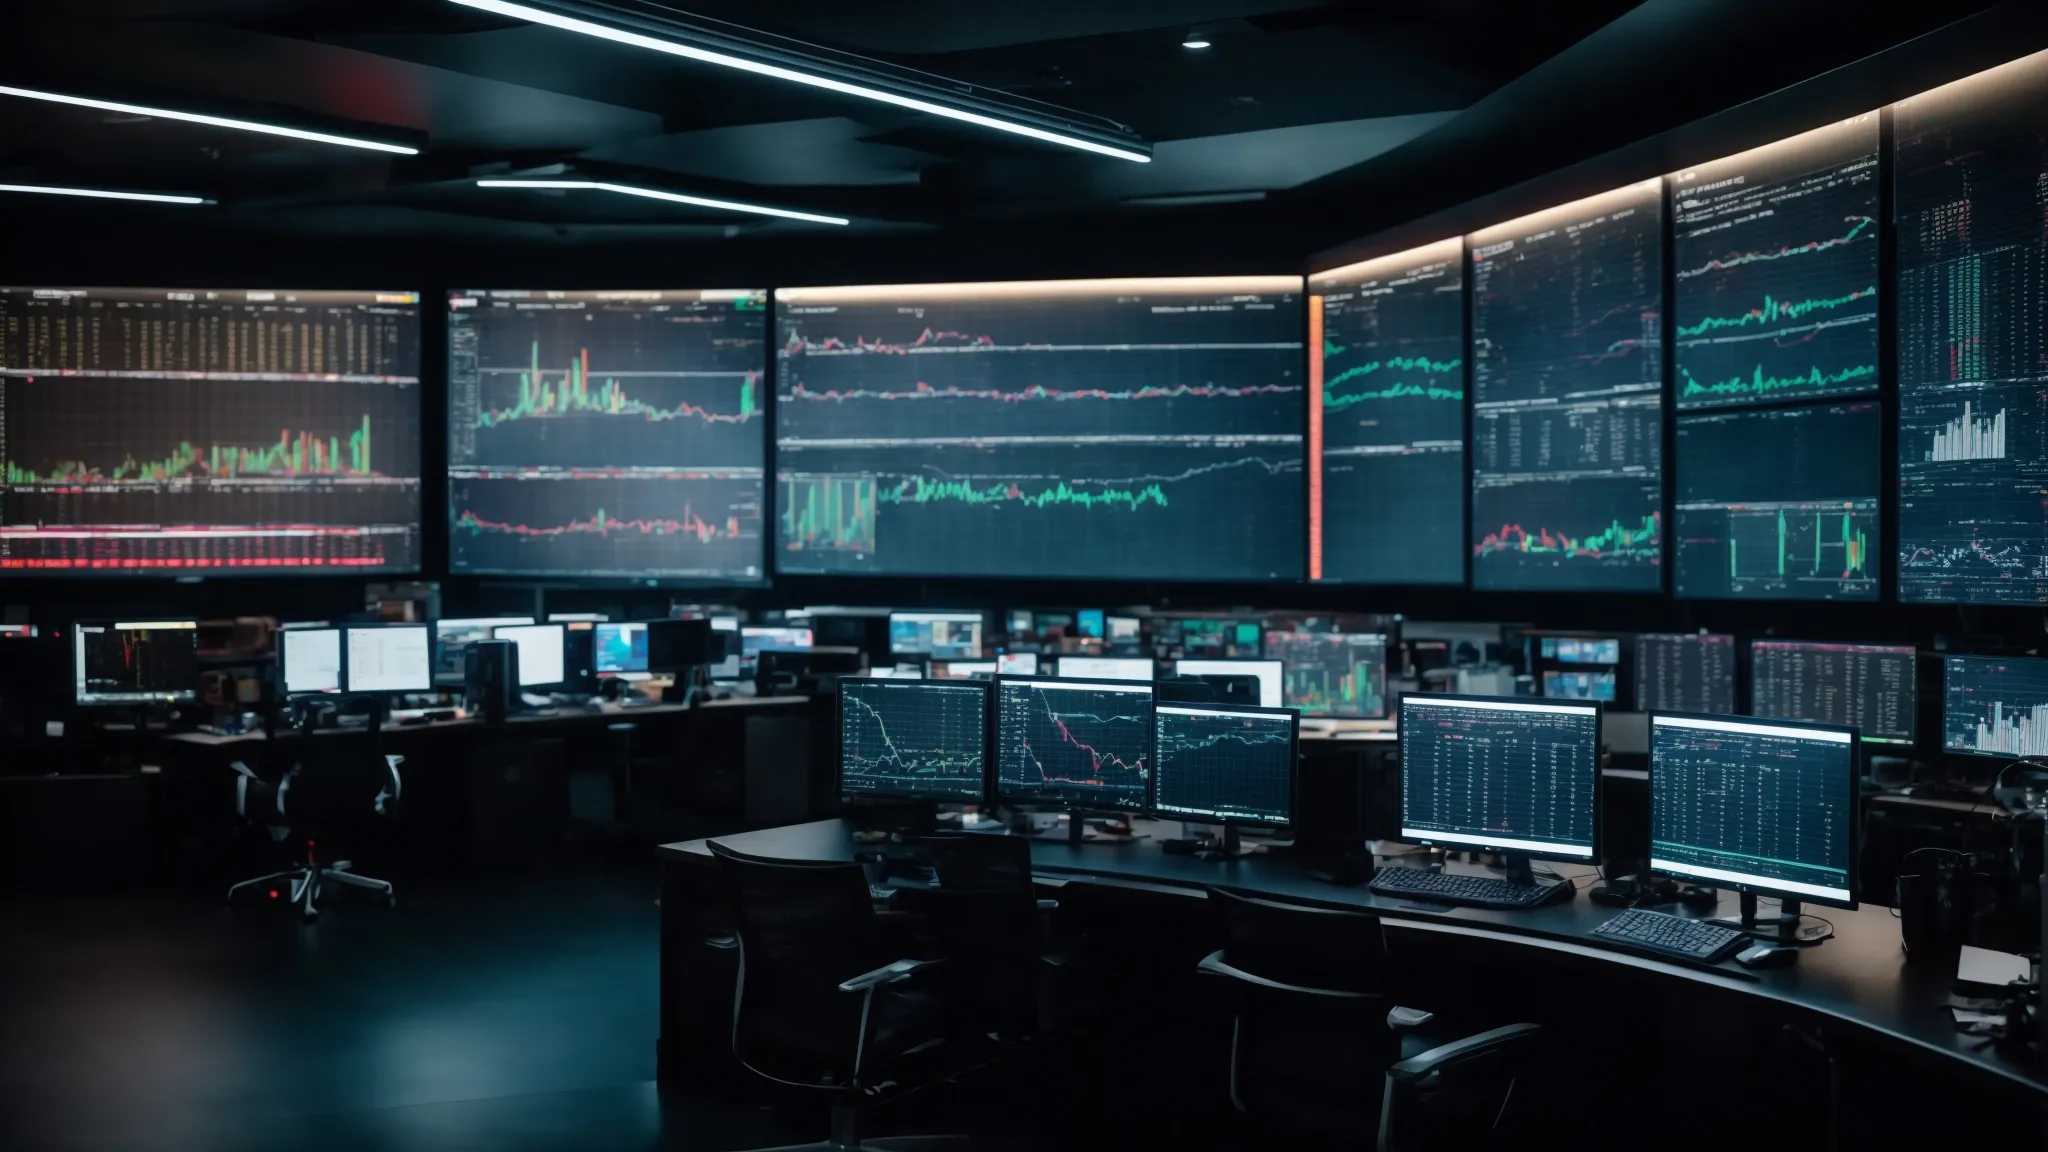 a high-tech command center with rows of computer screens displaying graphs and analytics representing market trends and seo data.